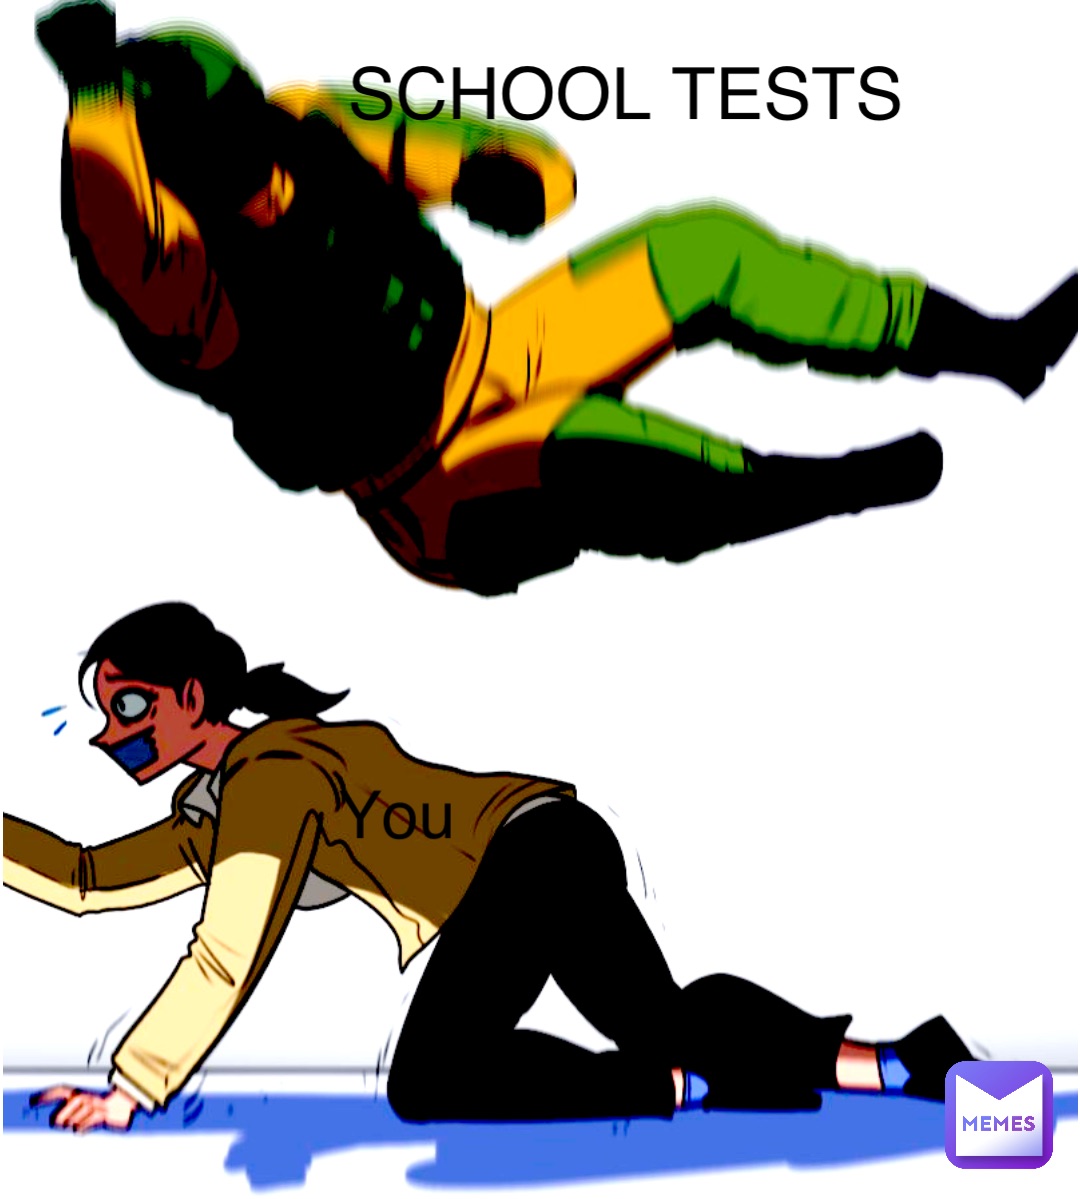 Double tap to edit You SCHOOL TESTS